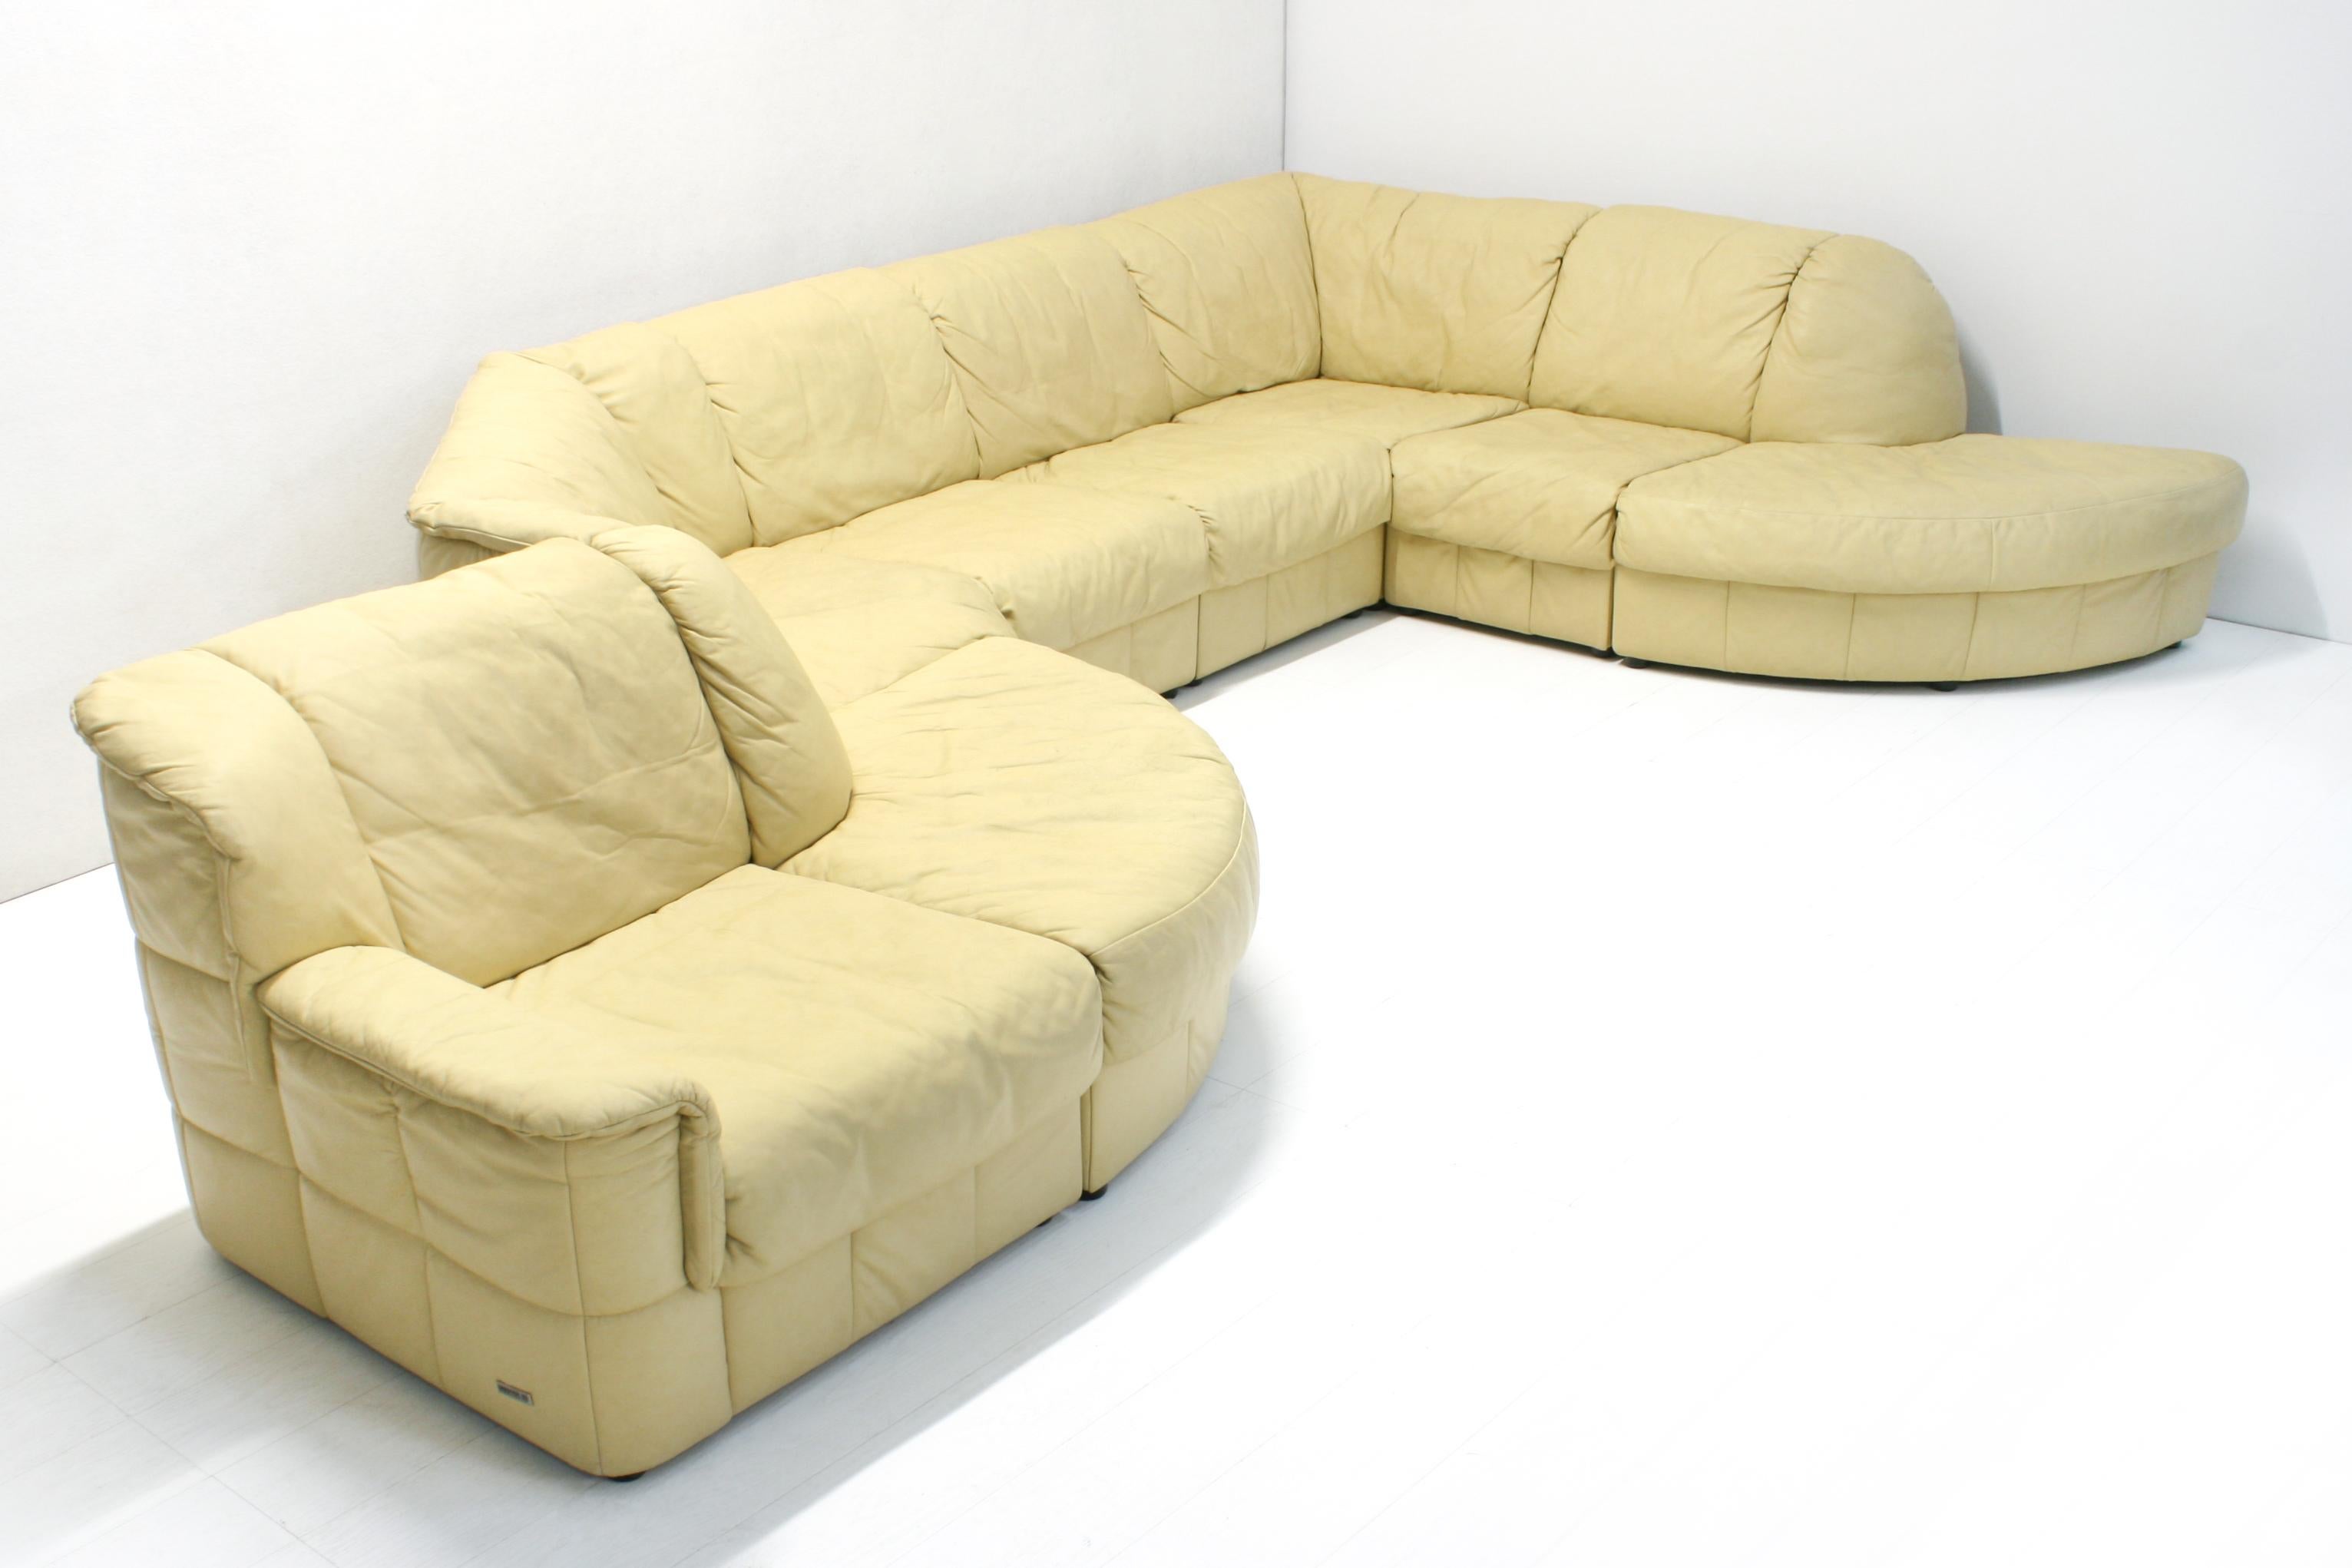 8 Piece Modular Snake Sofa in Yellow Pastel Quilted Leather from Laauser For Sale 12